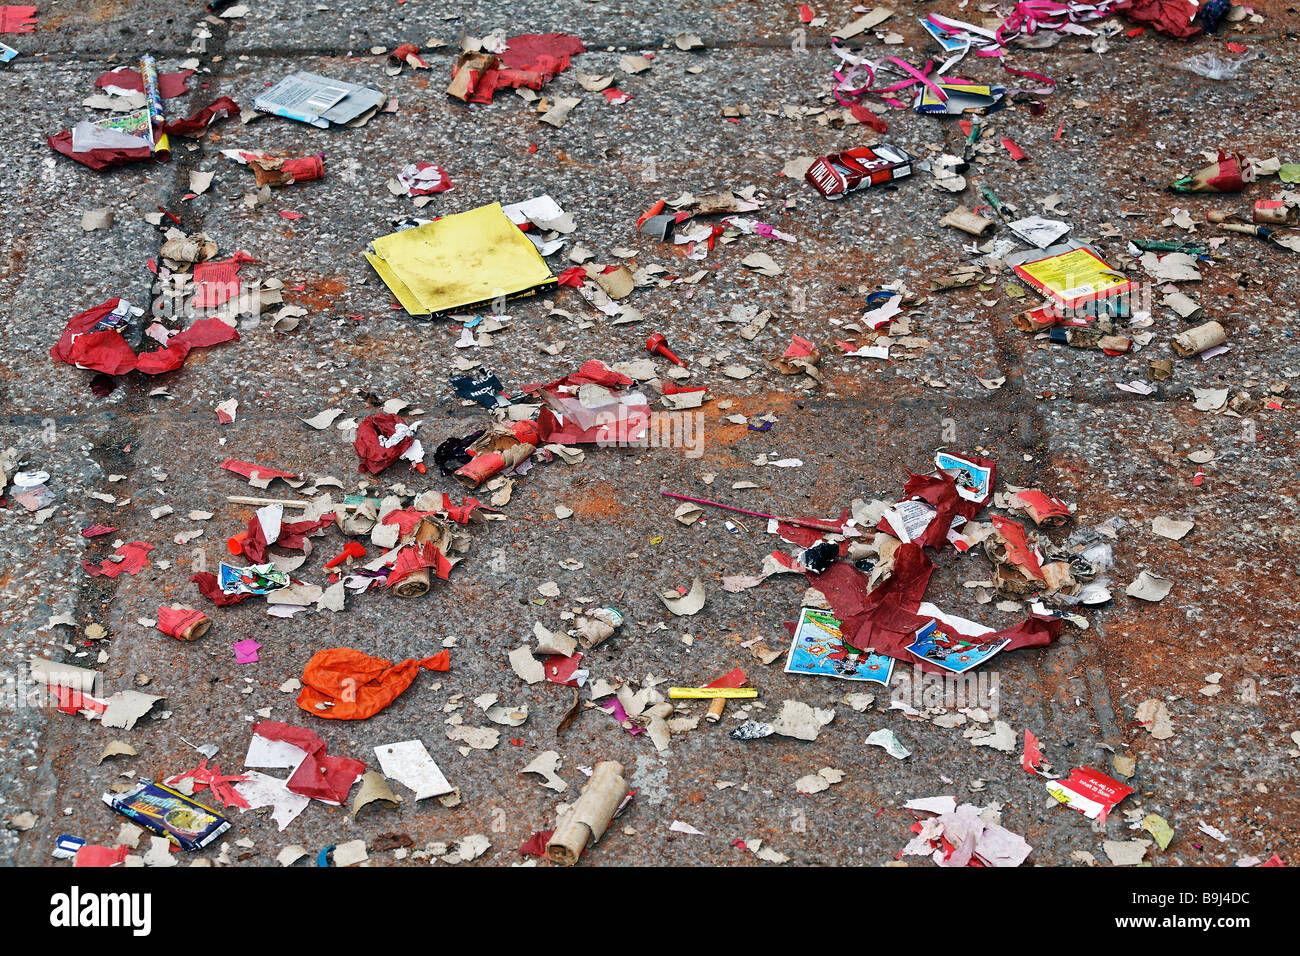 Remains of fireworks and crackers on the pavement, New Year's Eve, New Year Stock Photo